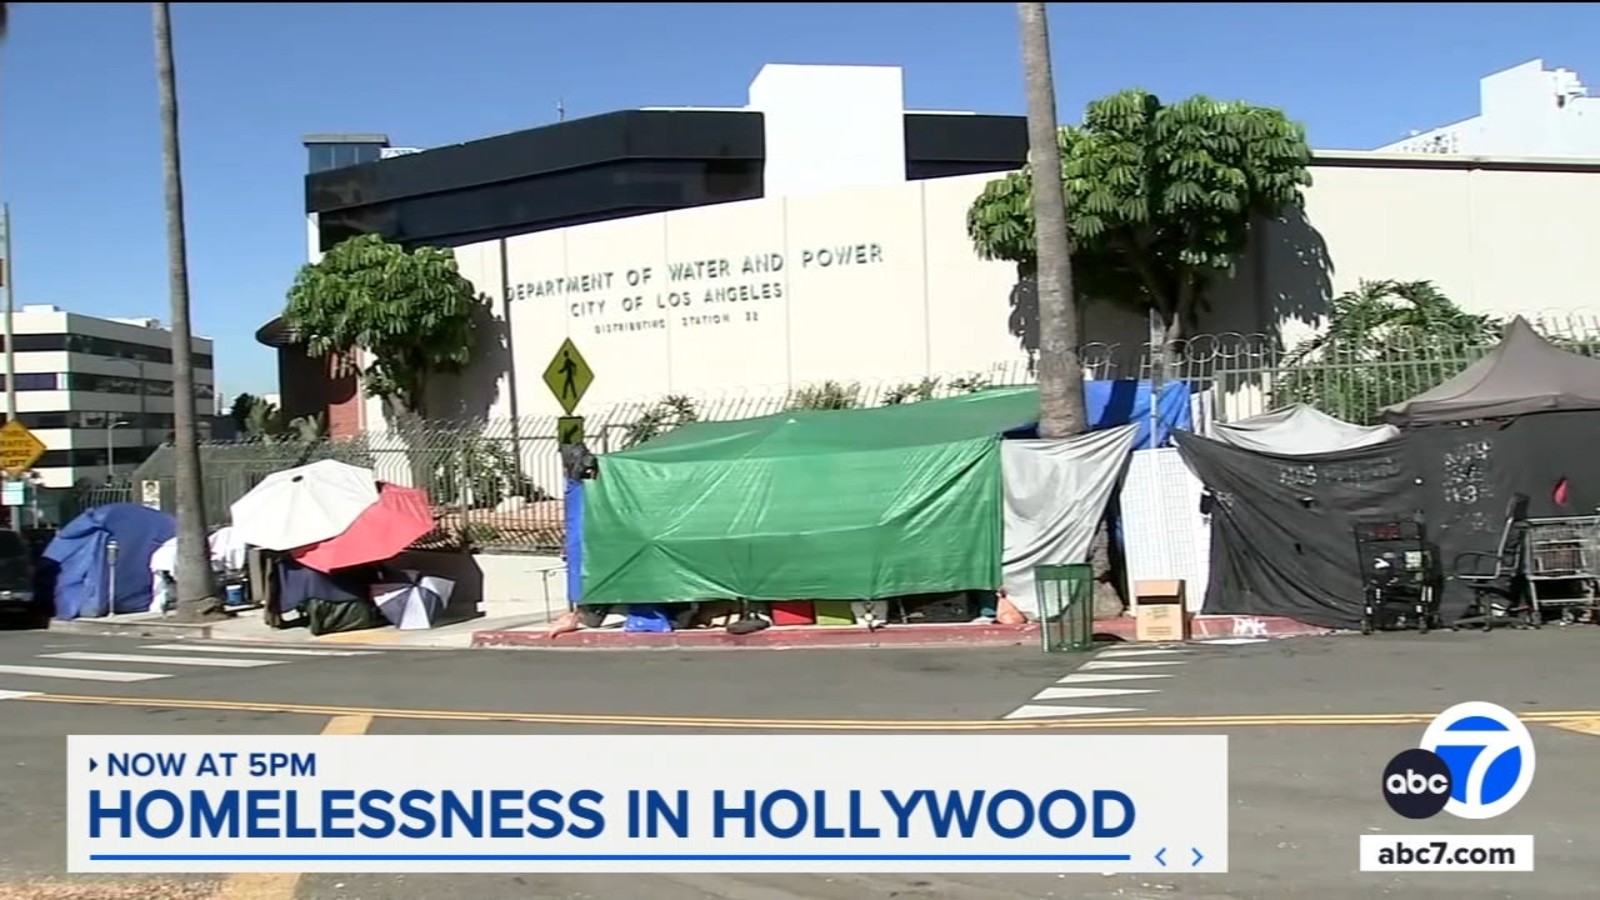 Bass says more homeless encampments will disappear from Hollywood